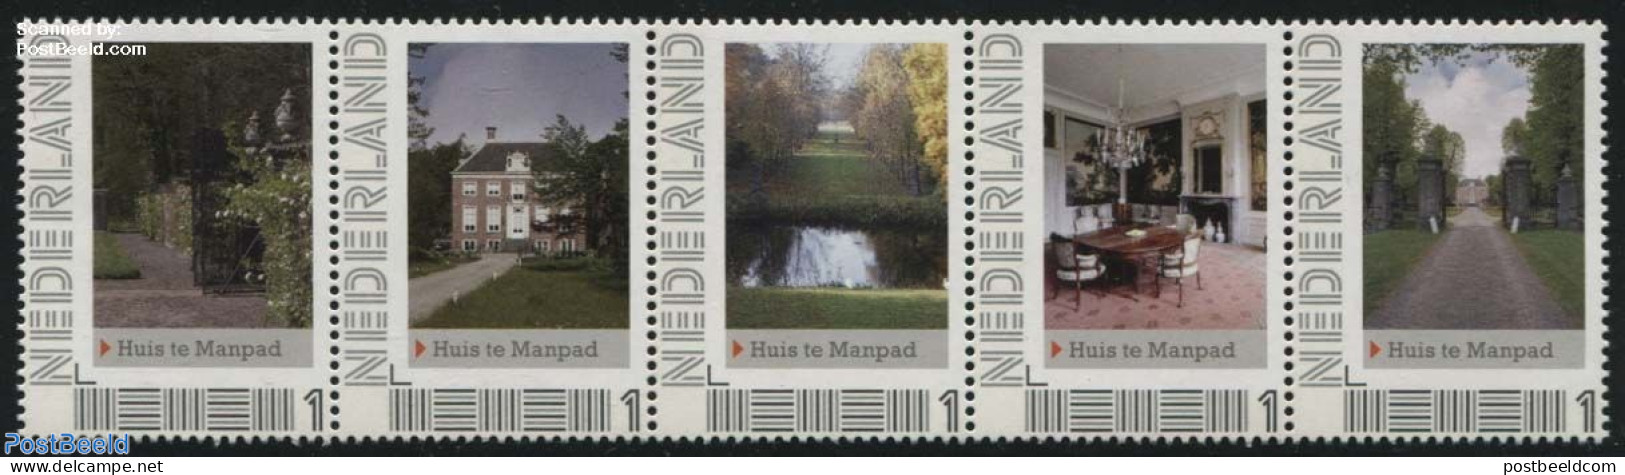 Netherlands - Personal Stamps TNT/PNL 2012 Huis Te Manpad 5v [::::], Mint NH, Castles & Fortifications - Castillos